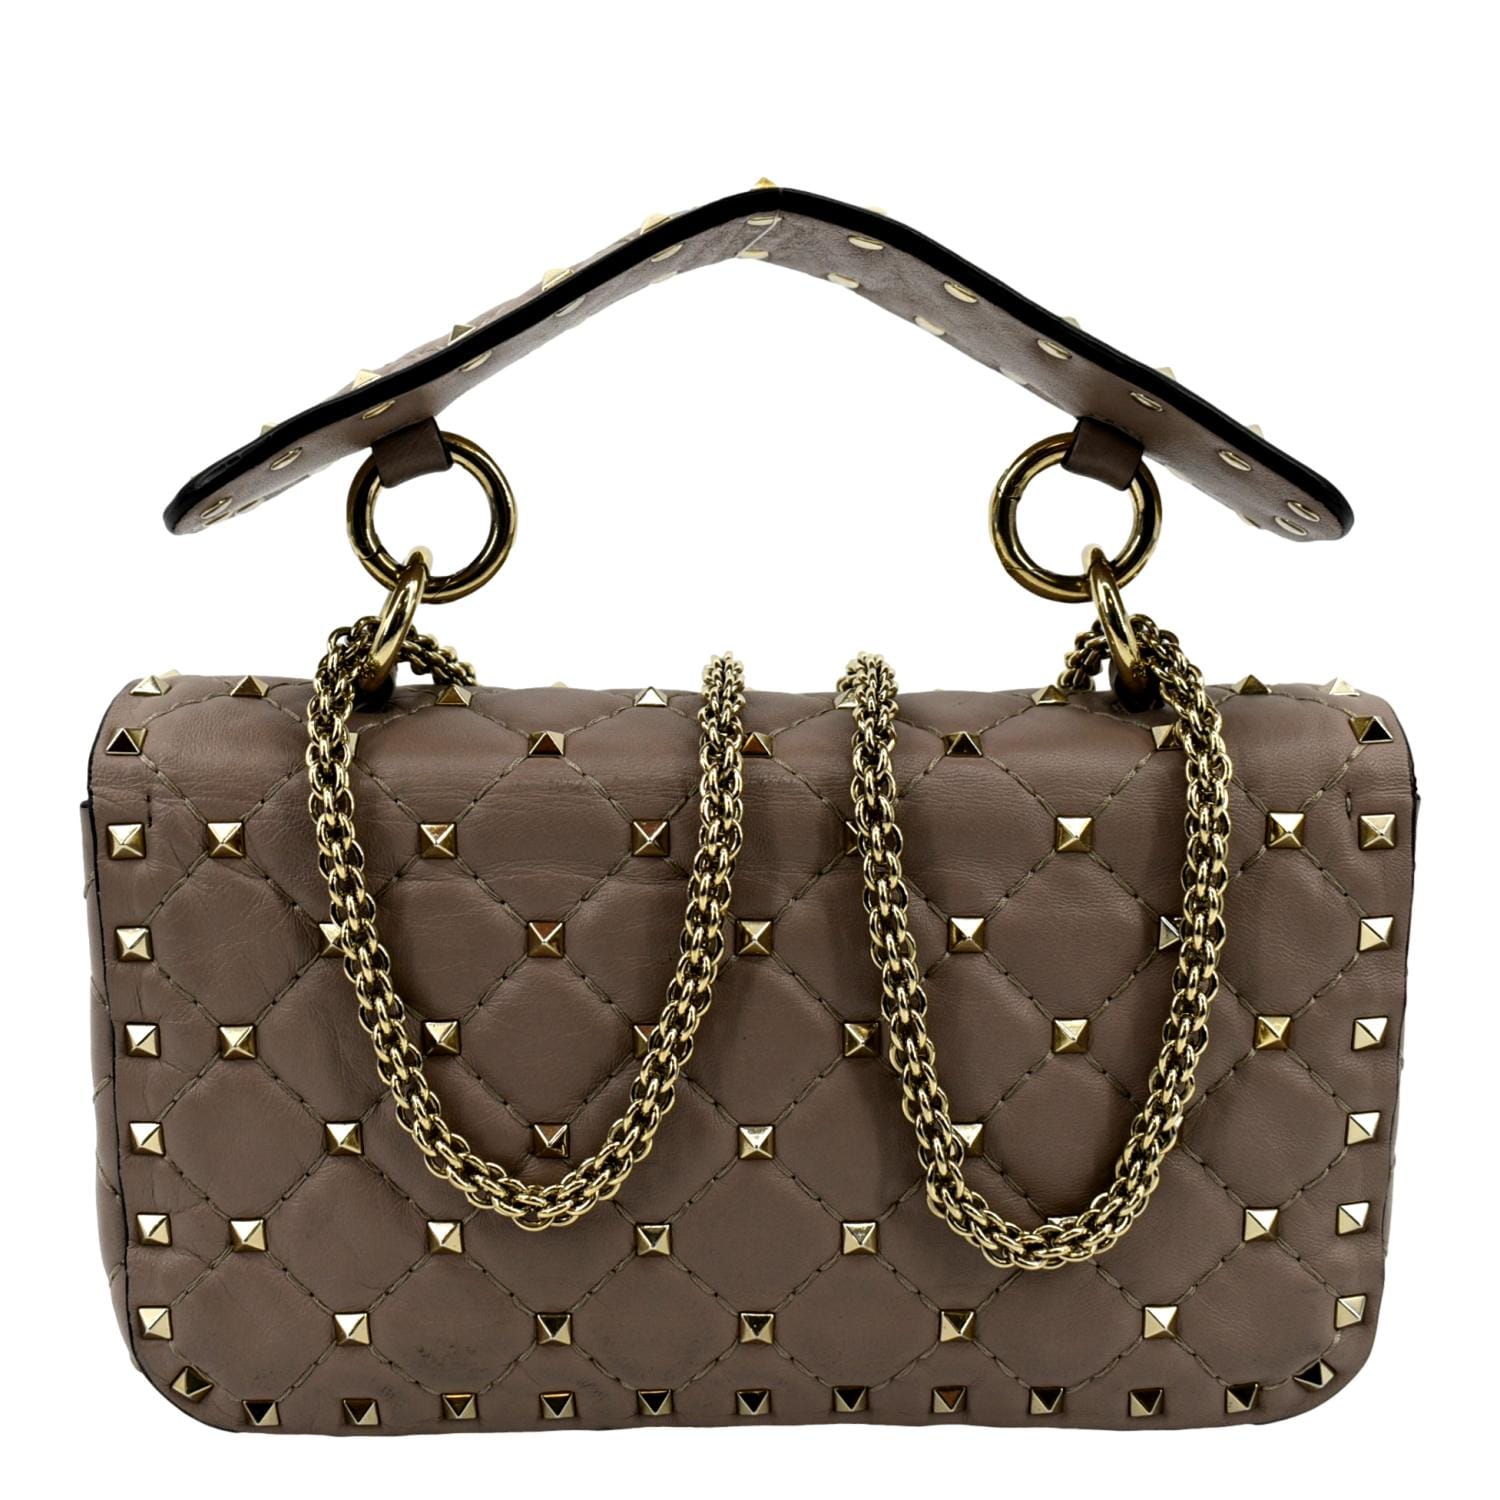 Valentino Rockstud Spike Medium Quilted Leather Top Handle bag.$3250